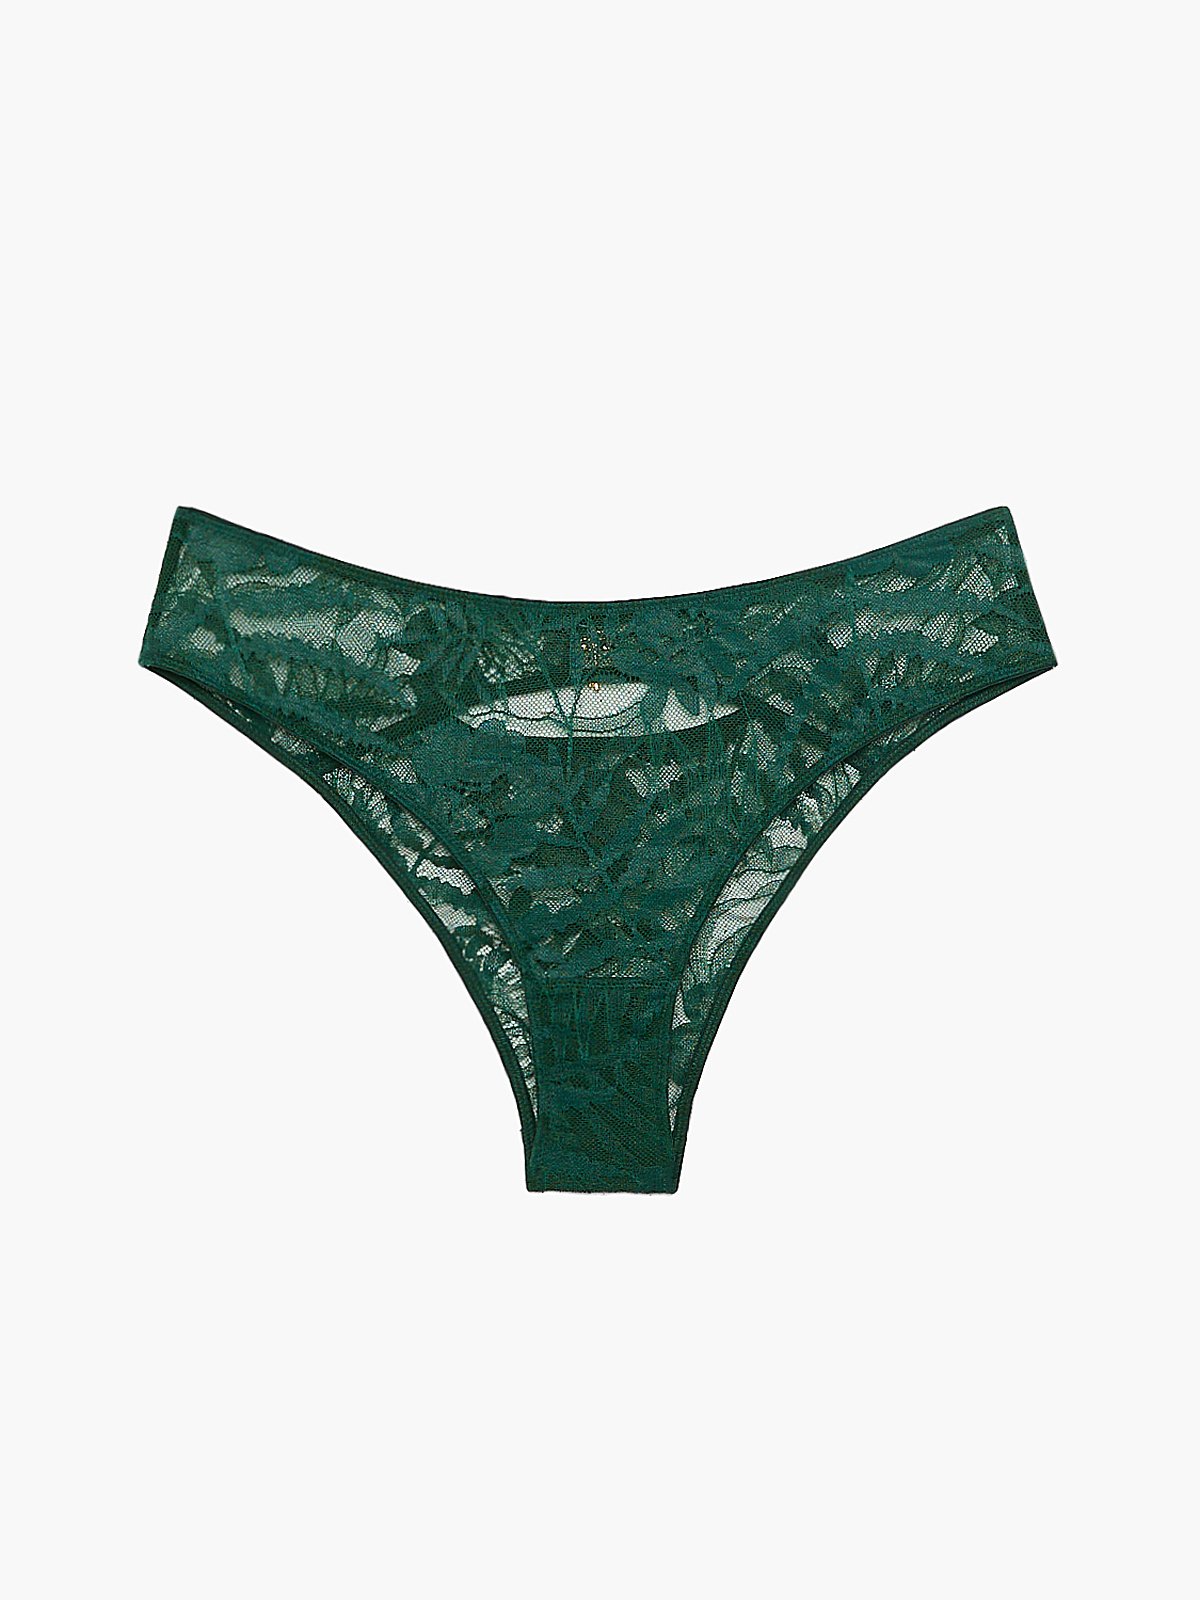 Shadowplay Lace Cheeky Panty in Green